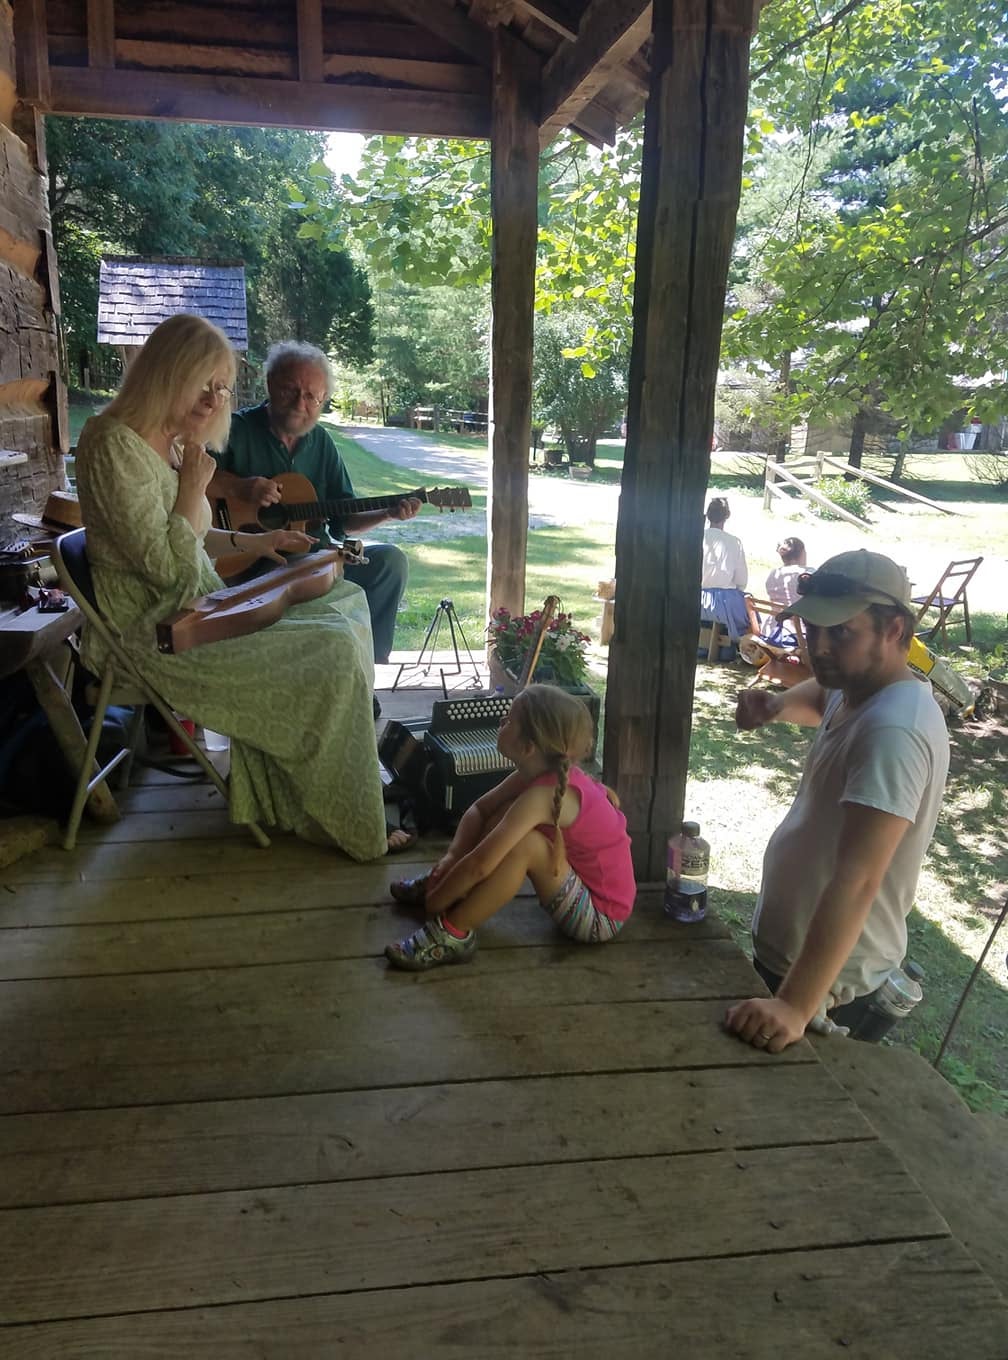 The wonderful folks at the history village sang a song for our daughter, awesome place!